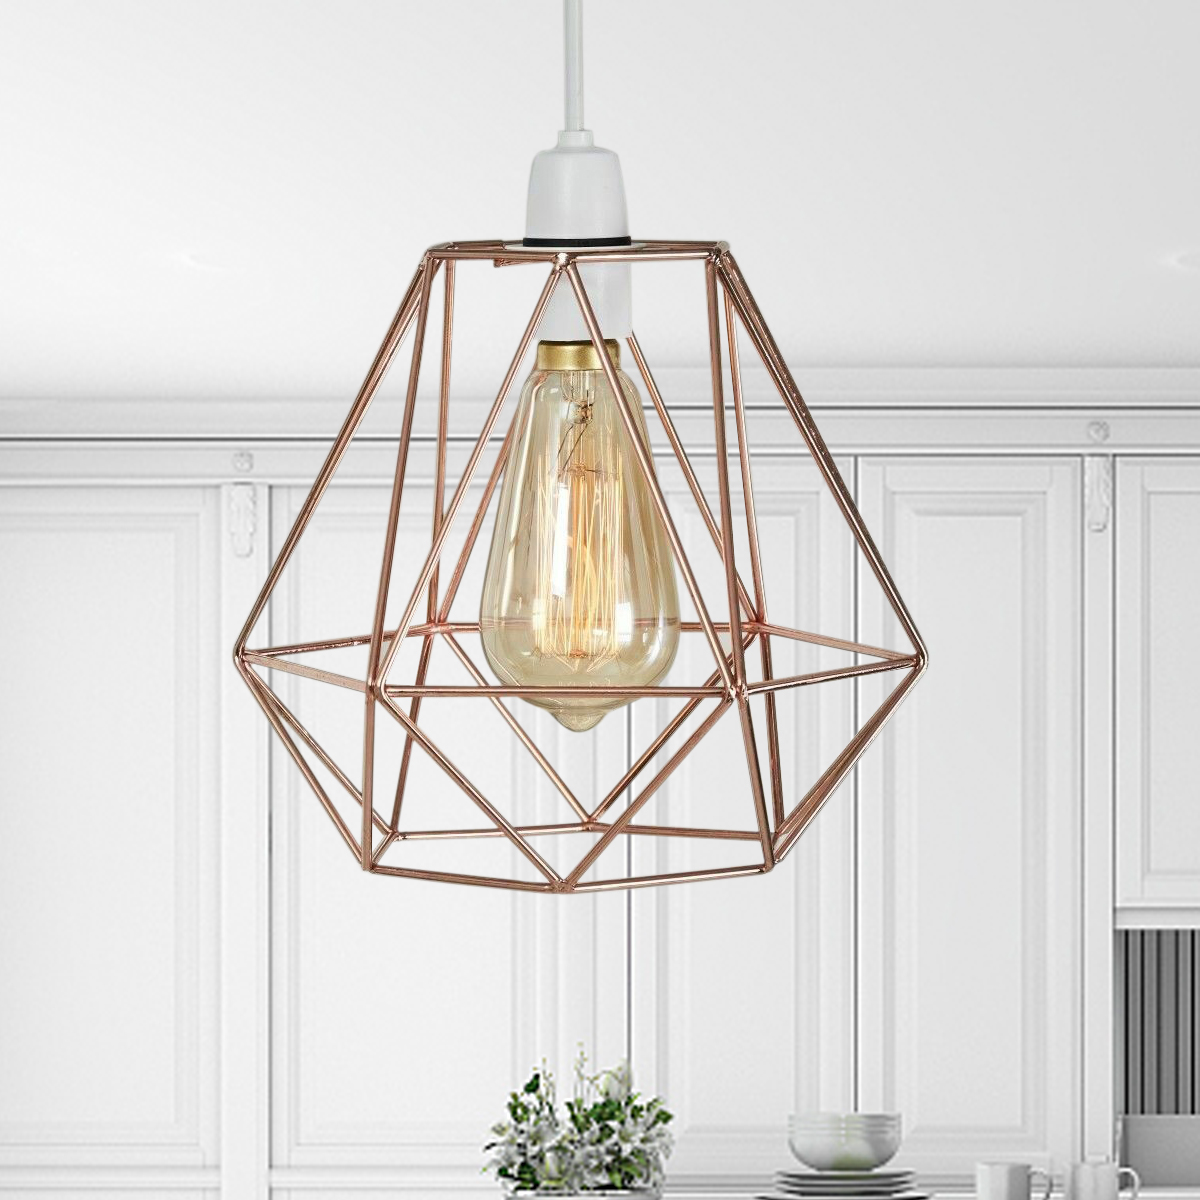 Geometric-Wire-Ceiling-Pendant-Light-Lampshade-Metal-Cage-Kitchen-Dining-Cafe-Without-Bulb-1758739-6